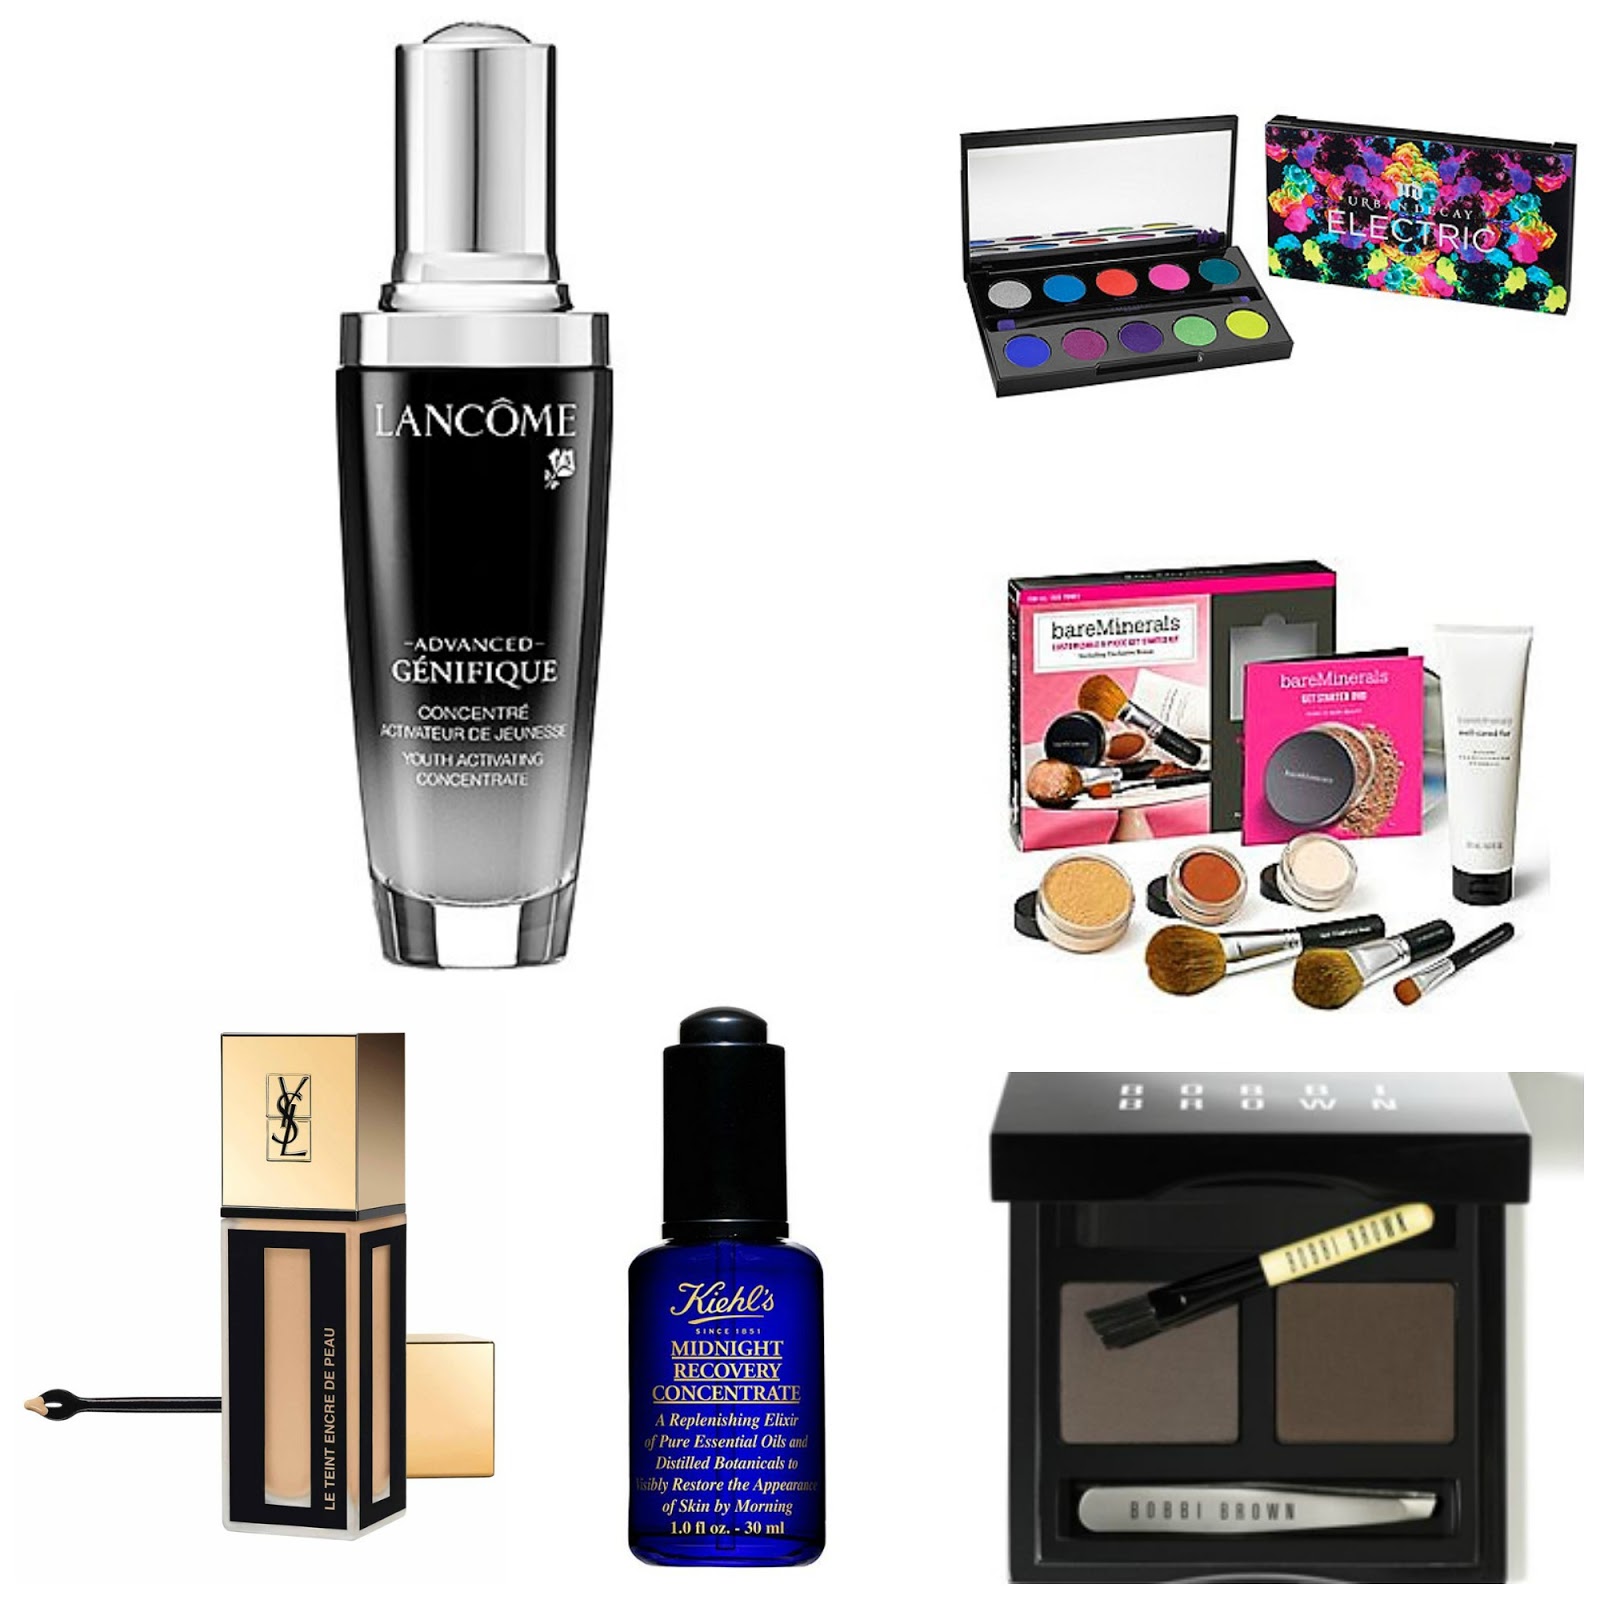 House of Fraser beauty confidential products